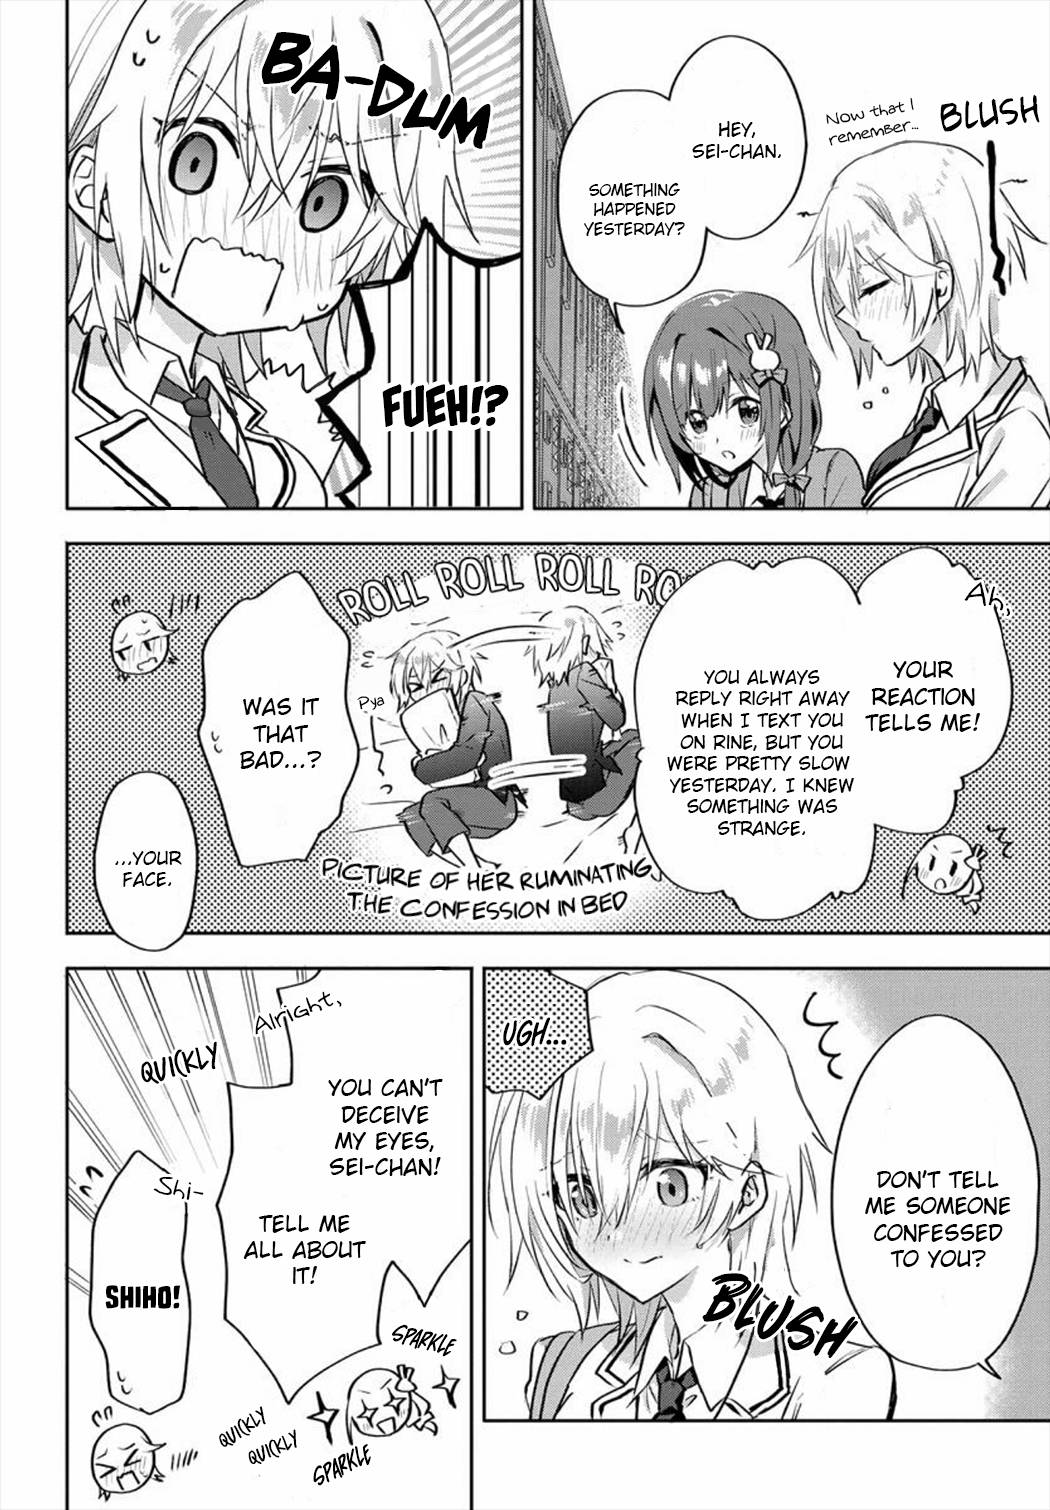 Since I’Ve Entered The World Of Romantic Comedy Manga, I’Ll Do My Best To Make The Losing Heroine Happy - chapter 2.1 - #6